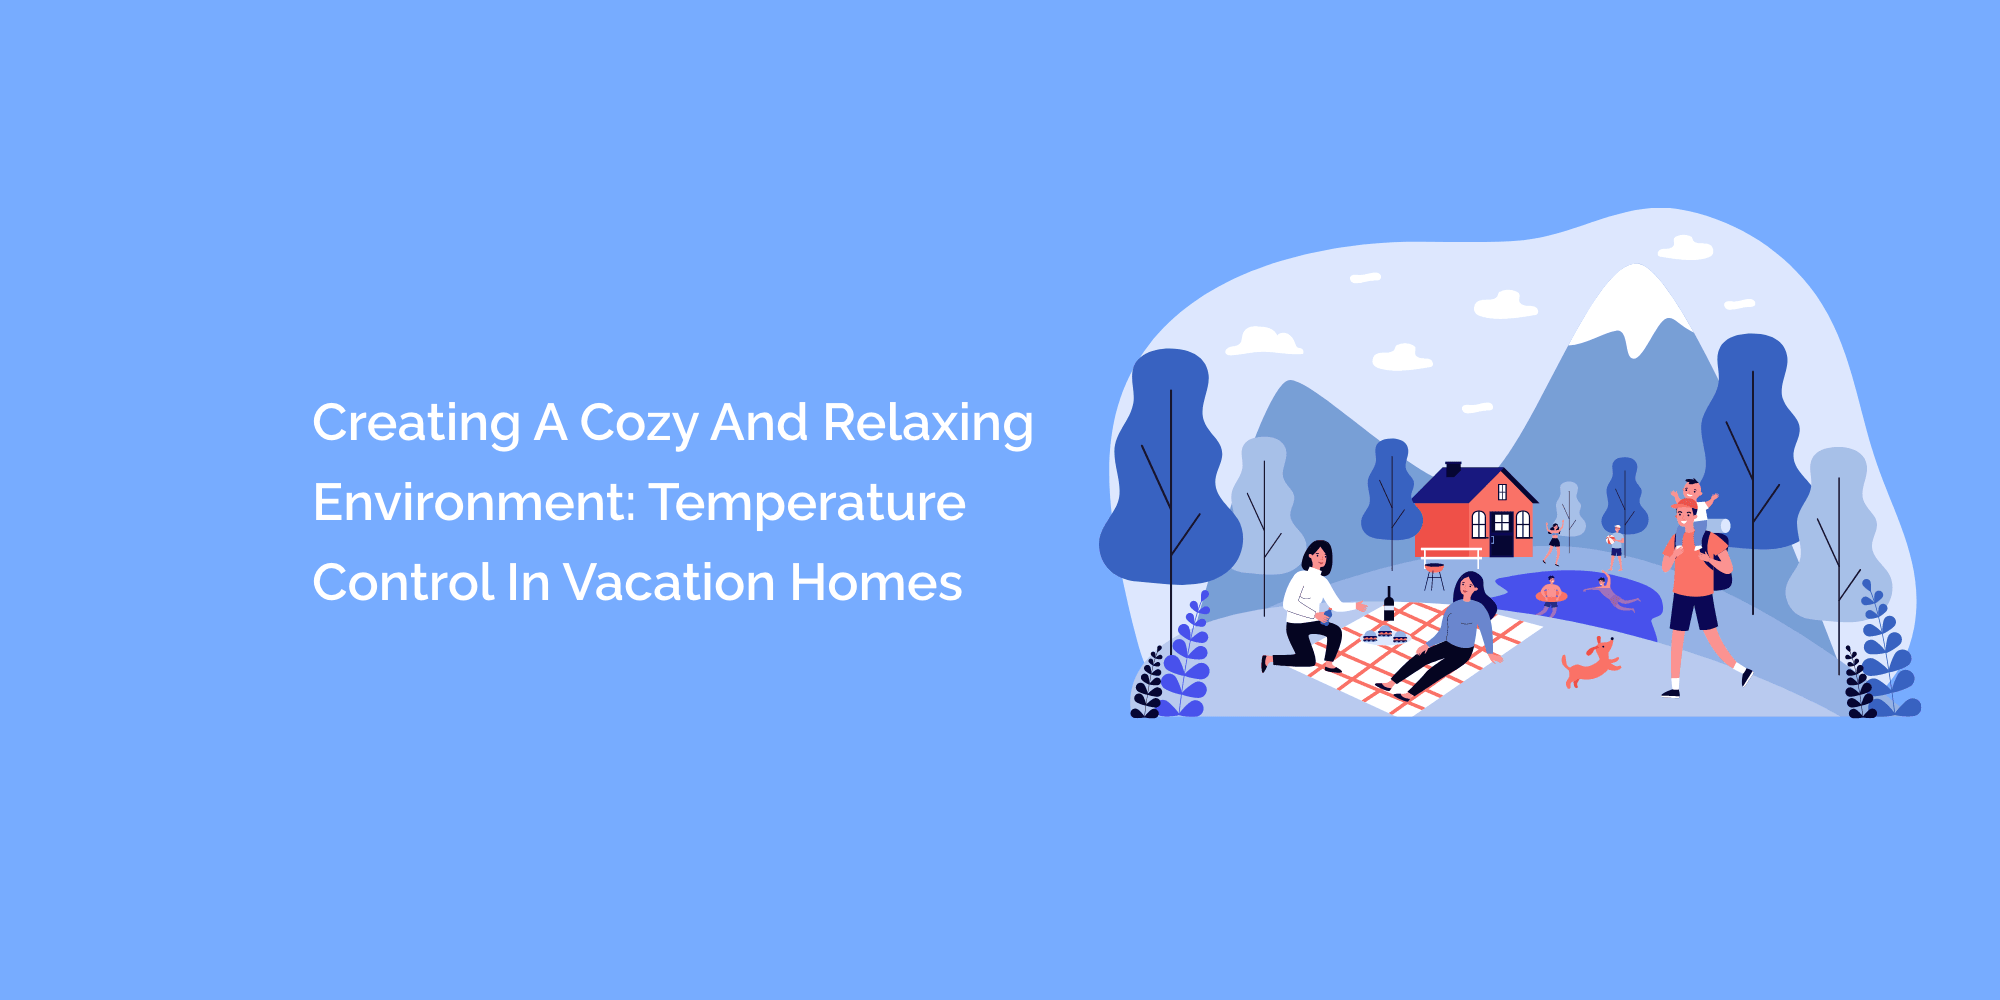 Creating a Cozy and Relaxing Environment: Temperature Control in Vacation Homes